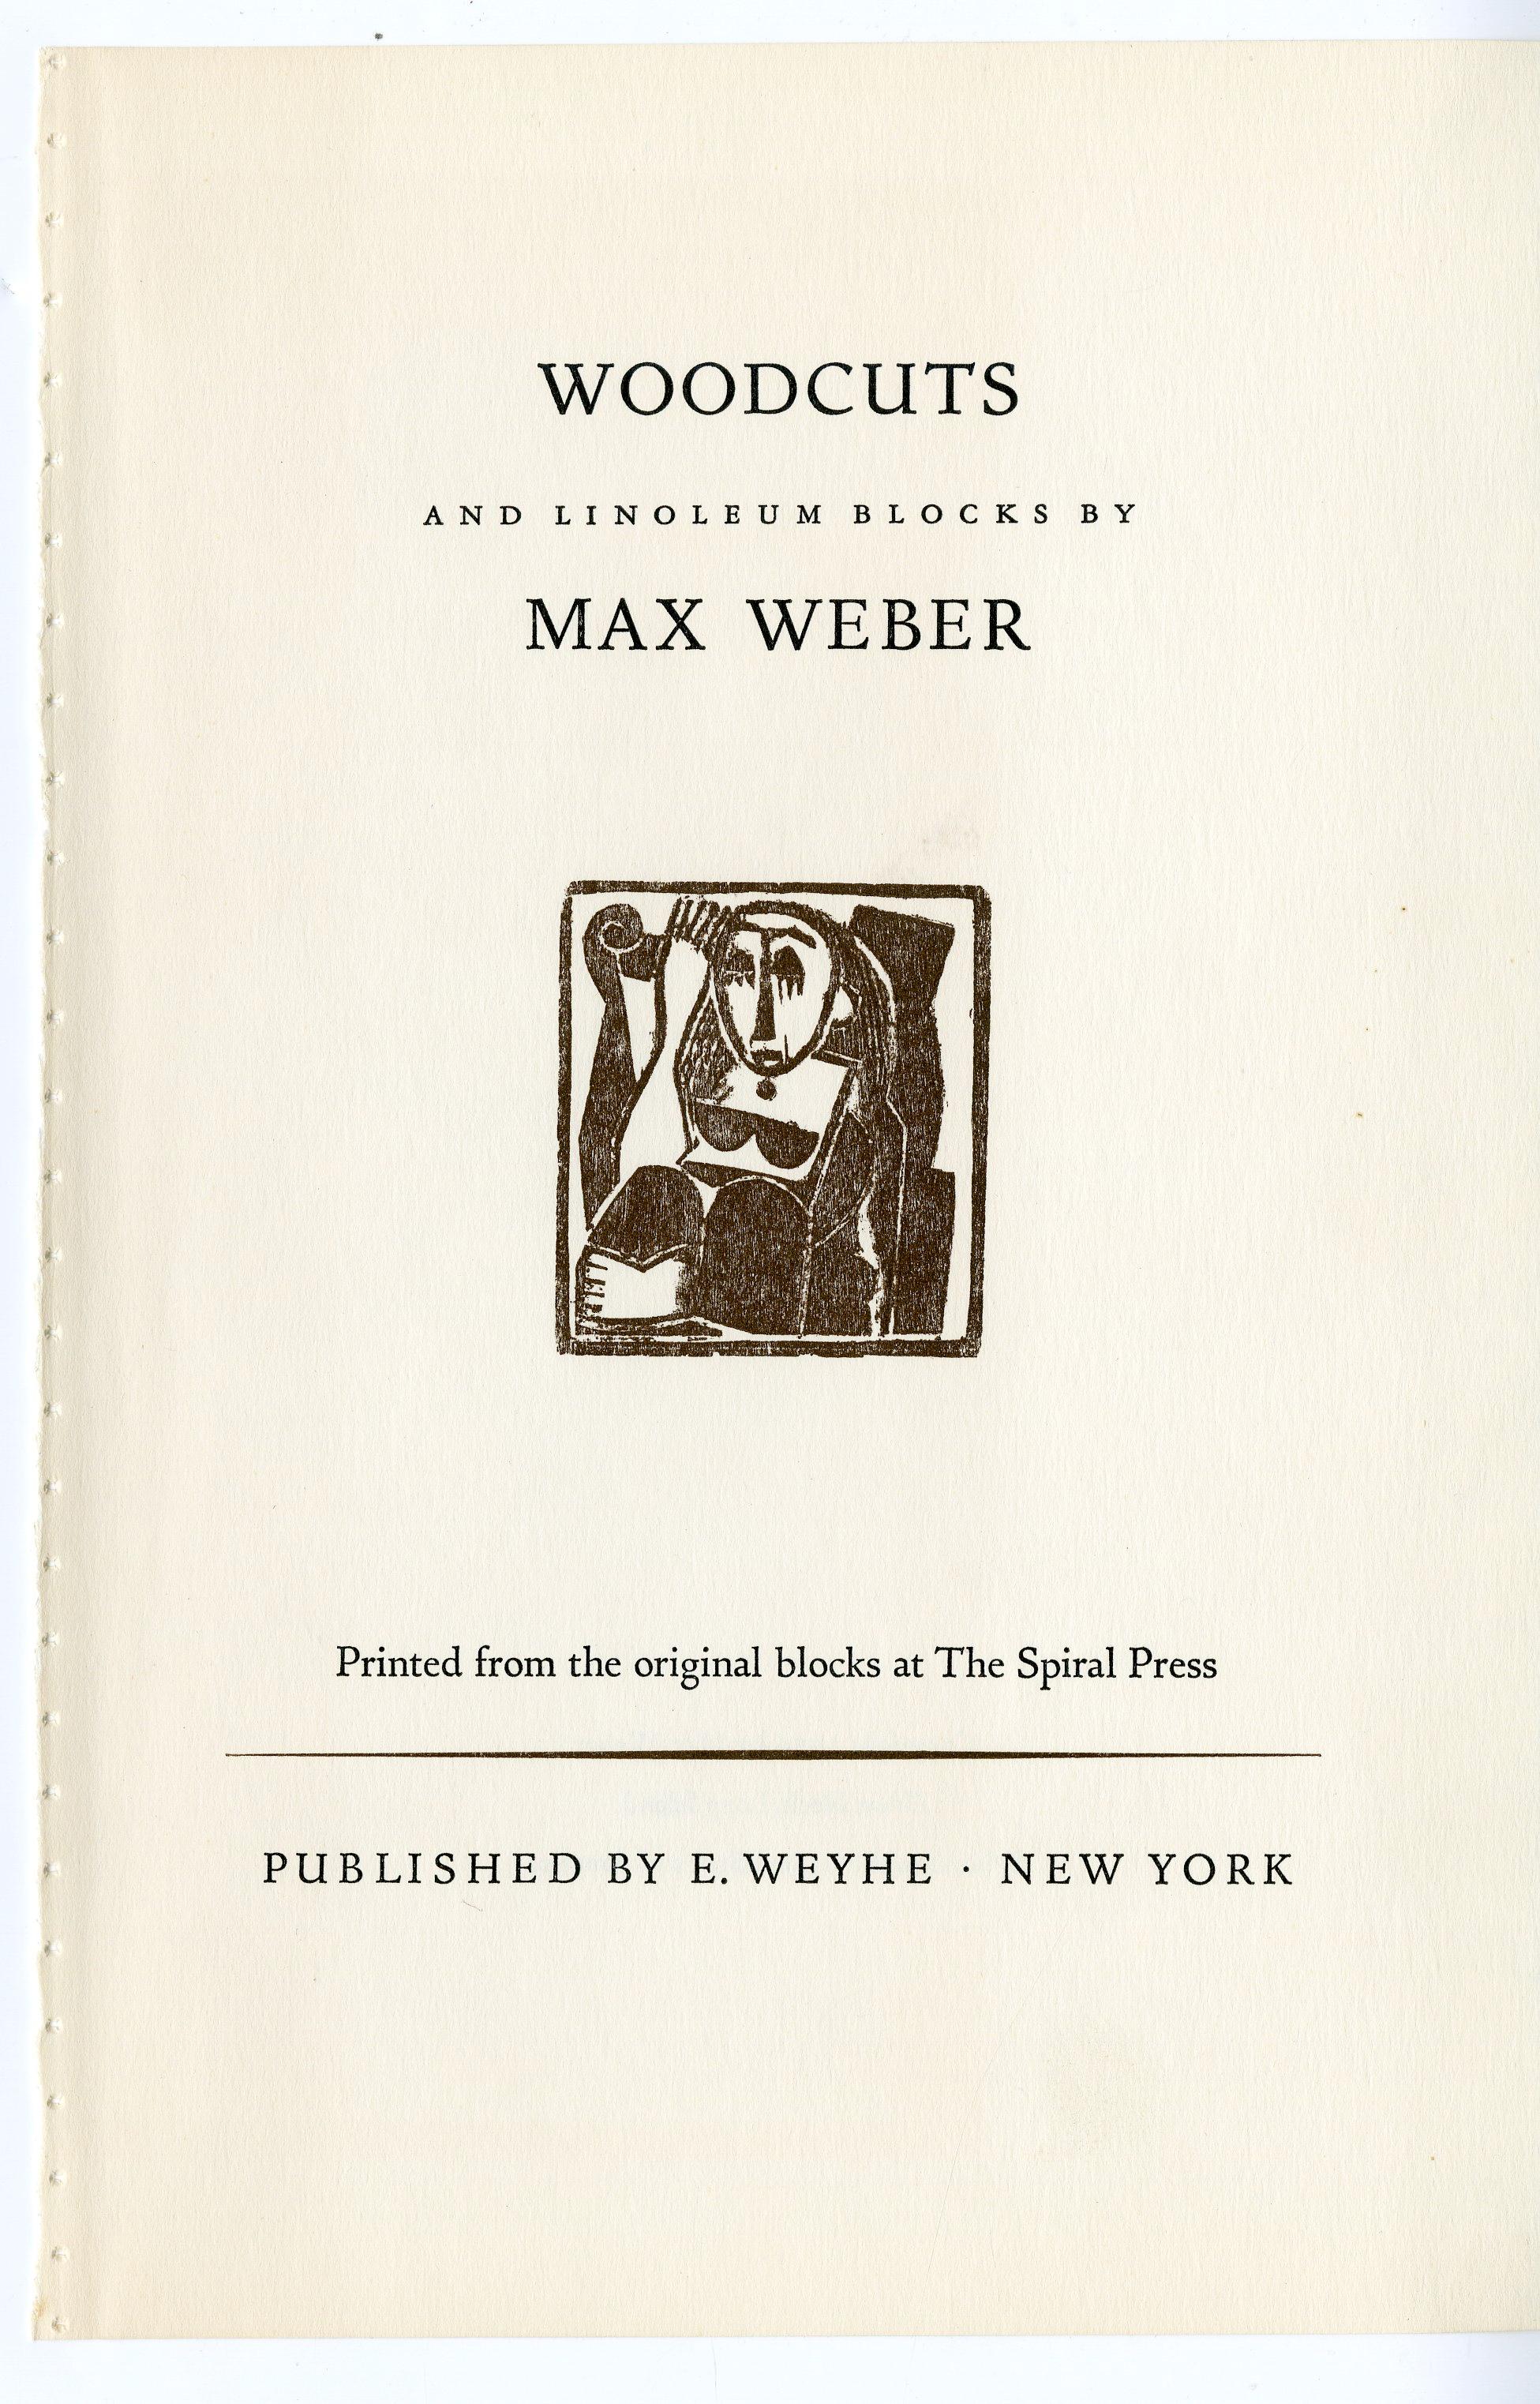 Nude with Upraised Arms - Print by Max Weber